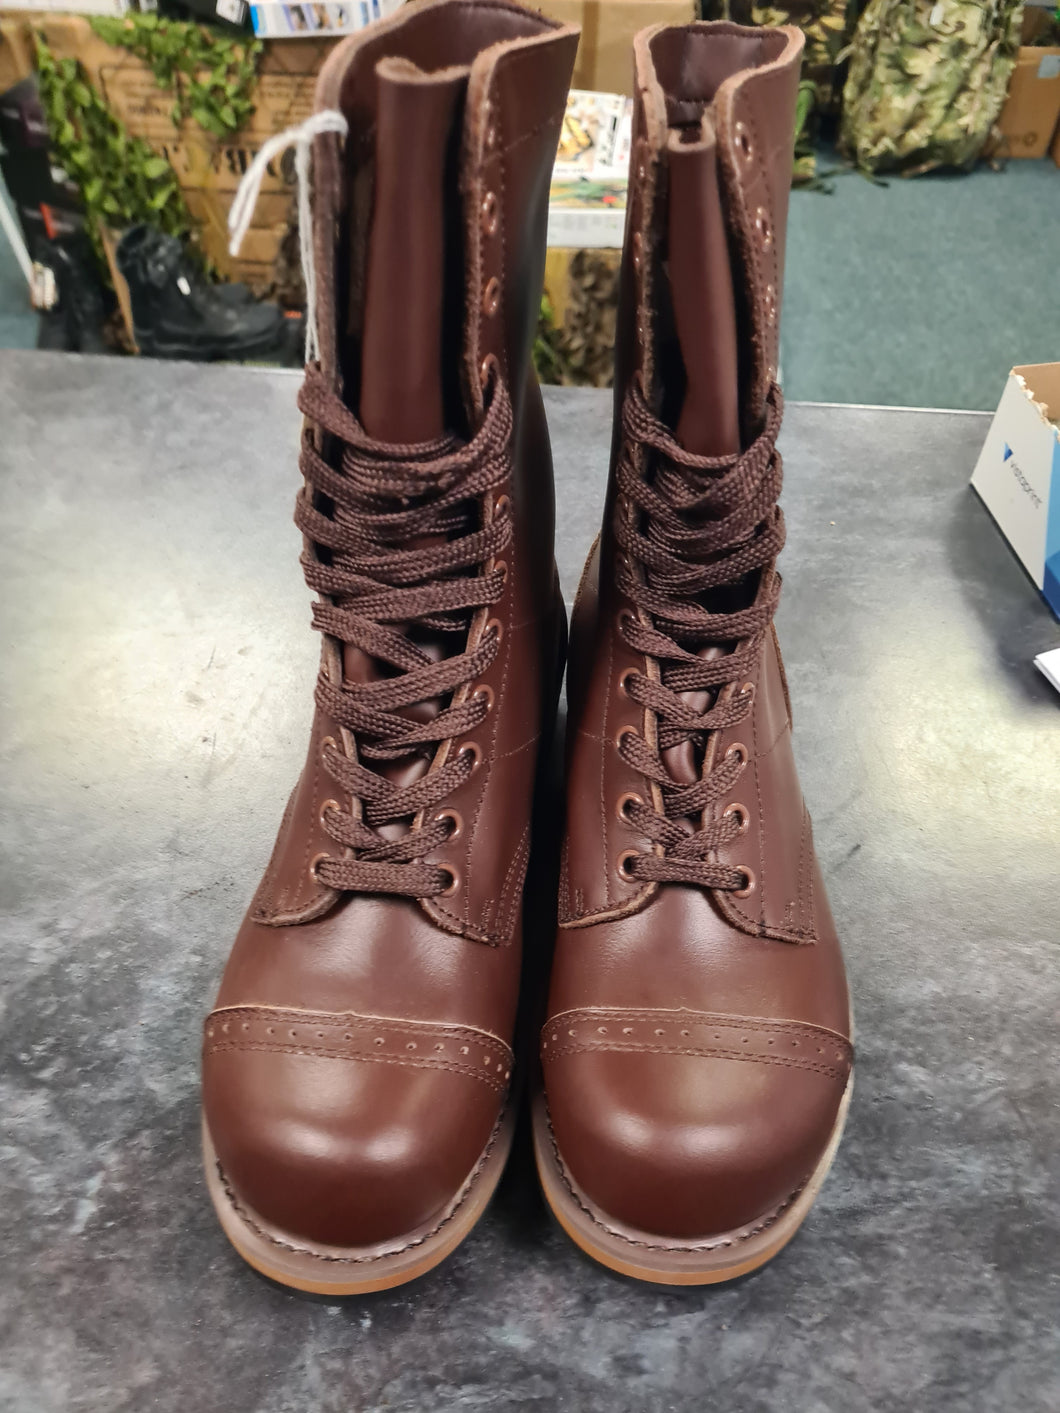 US WW11 Reproduction Airborne jump boots